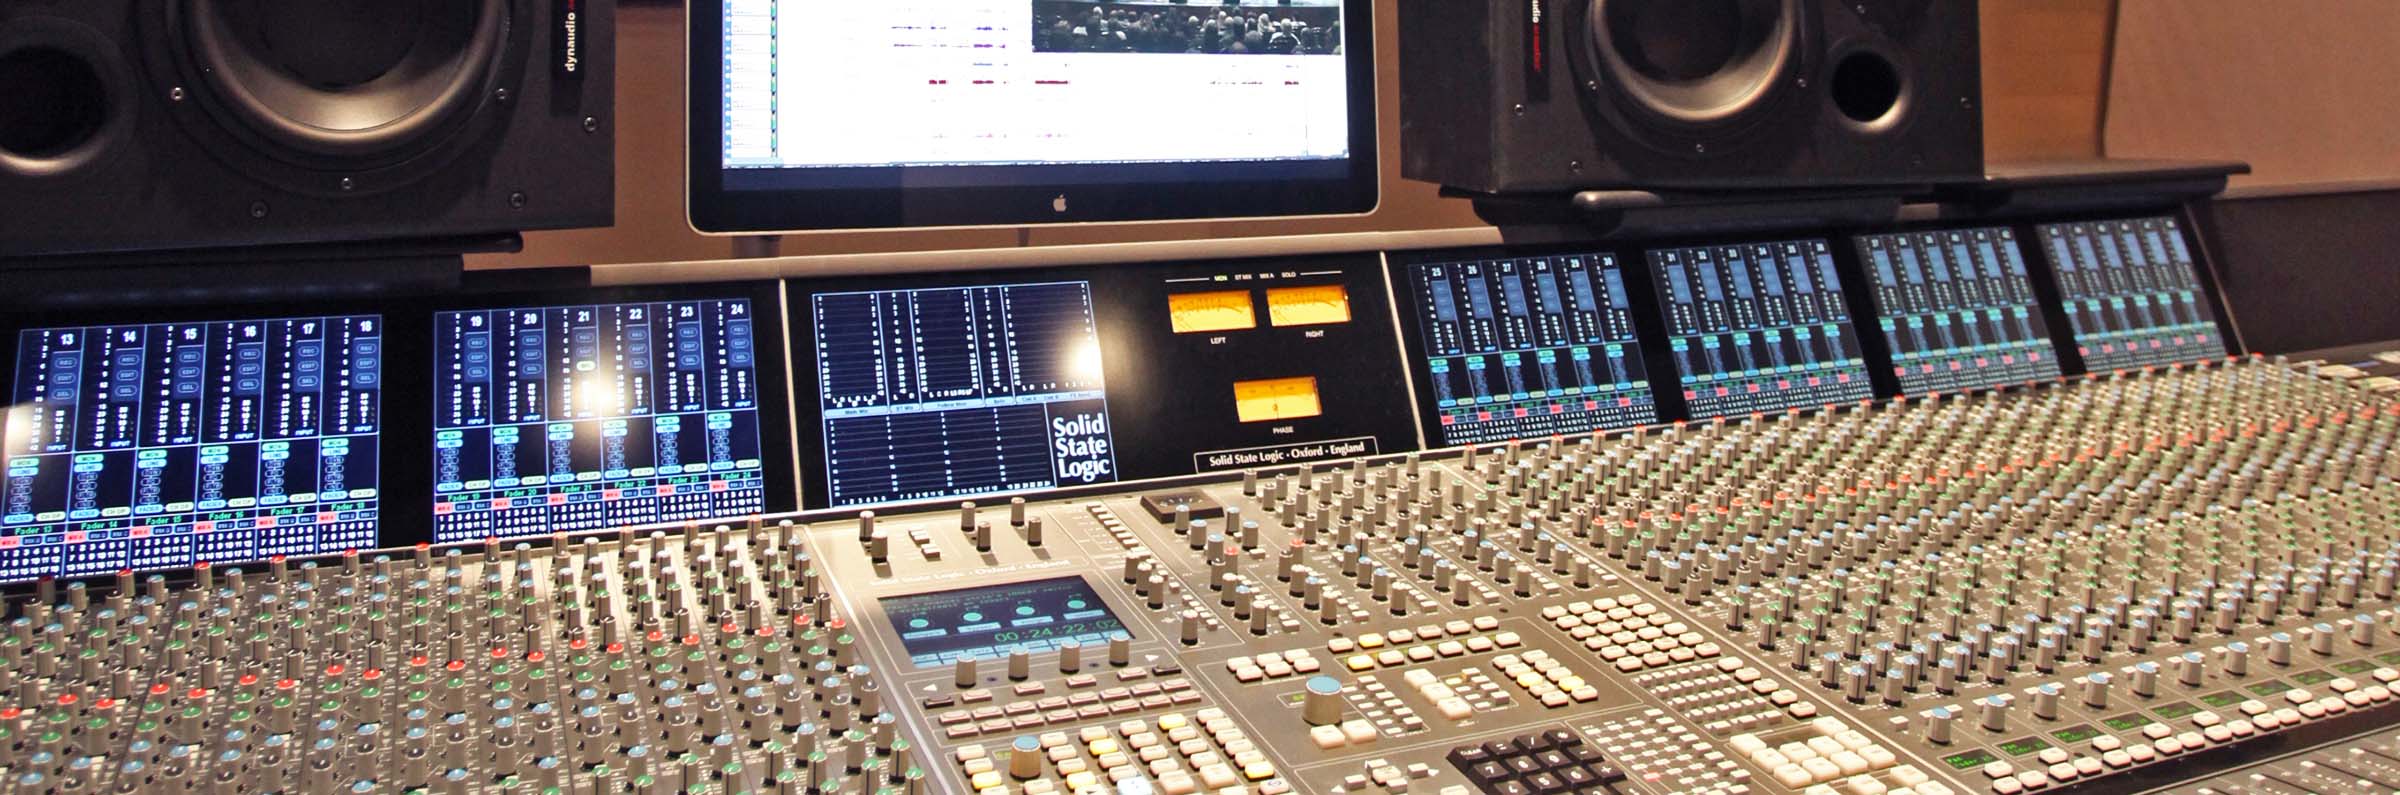 Music production sound board